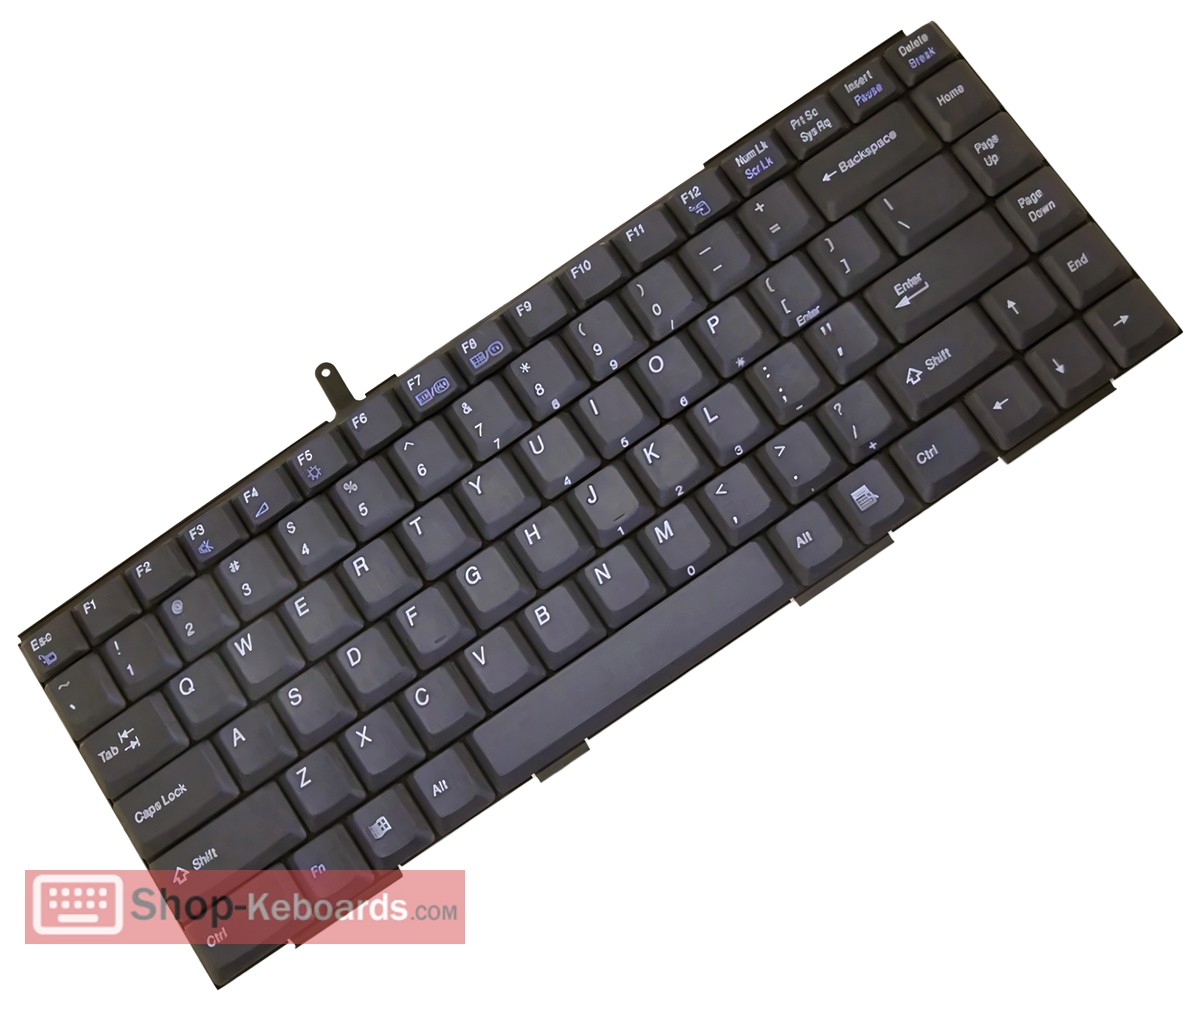 Sony VAIO PCG-F520 Keyboard replacement